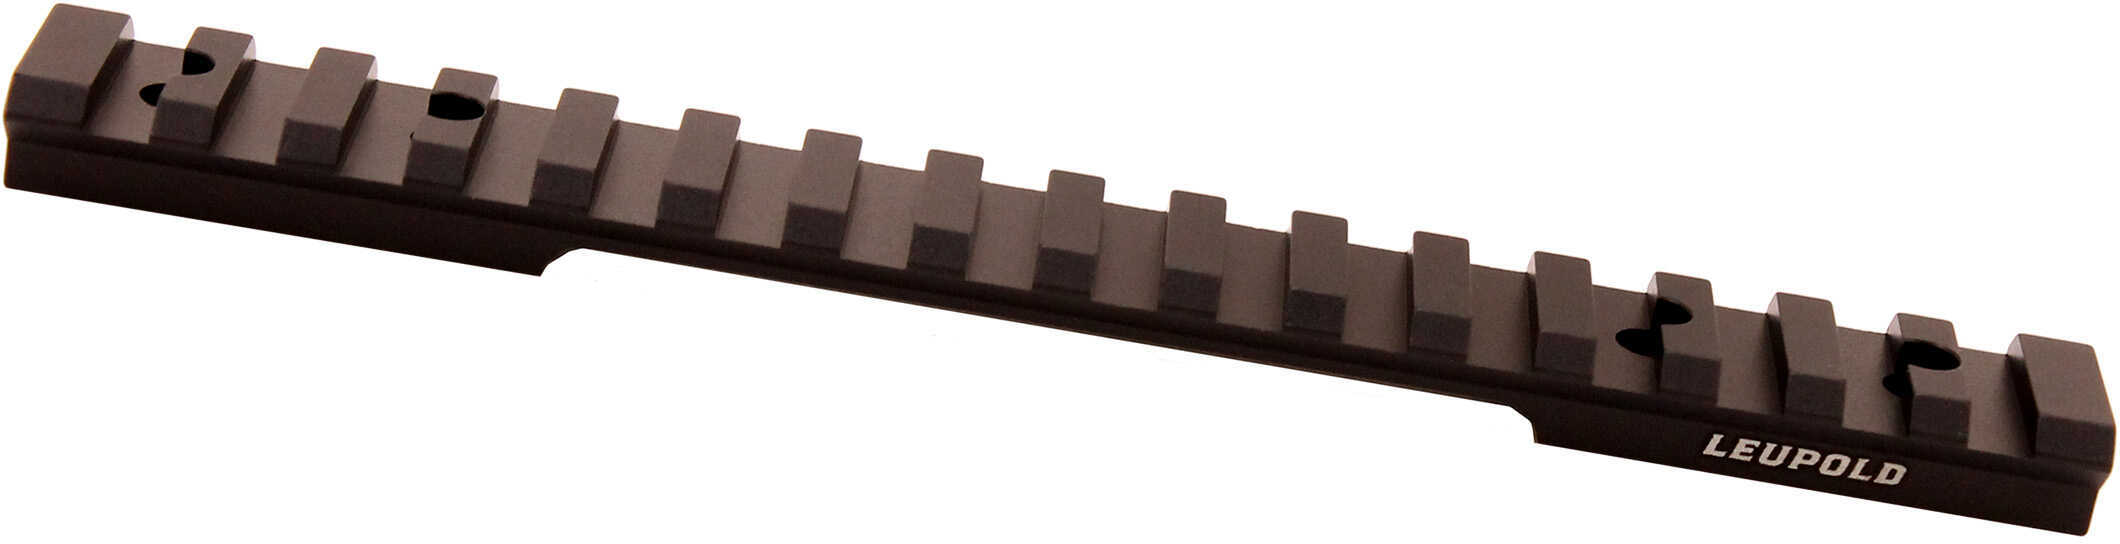 BackCountry Cross-Slot 1 Piece Base Browning A-Bolt, Long Action, Matte Black Md: 171346